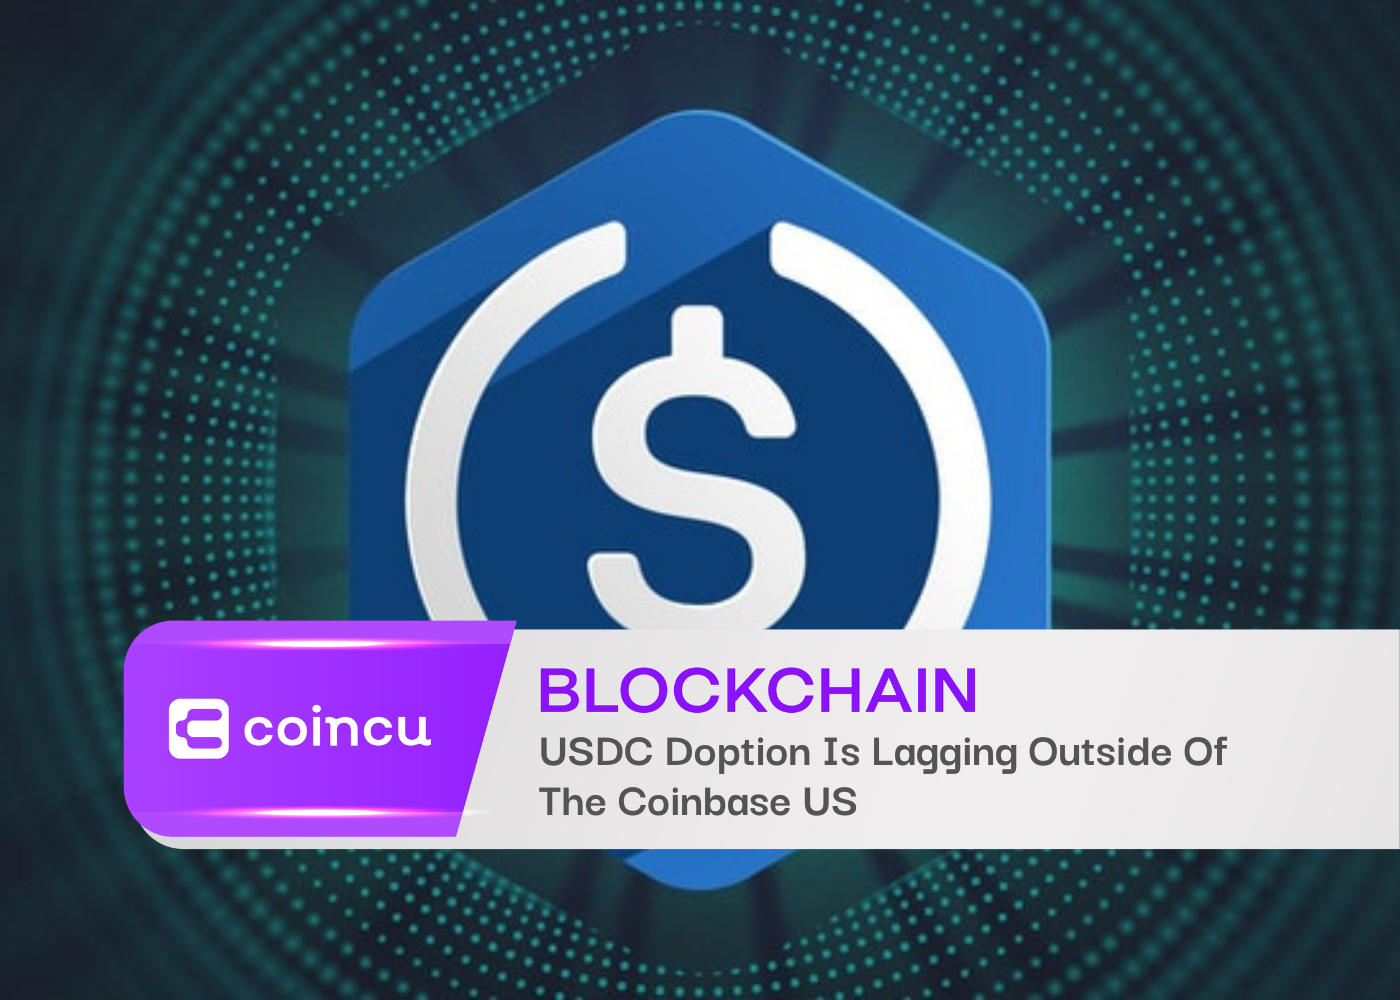 USDC Doption Is Lagging Outside Of